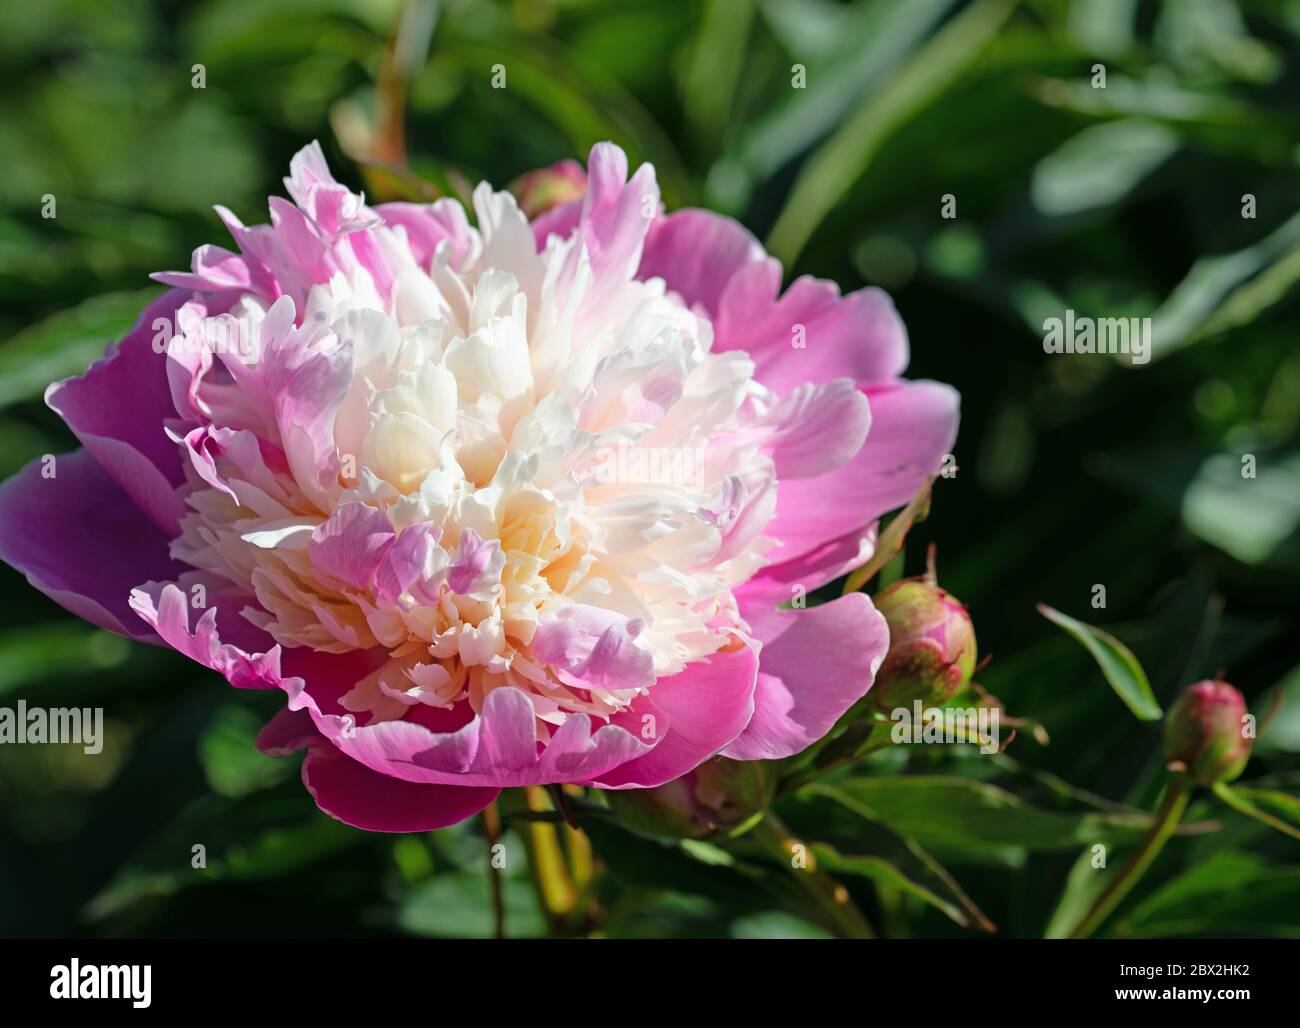 Blooming pink peonies, Paeonia, in early summer Stock Photo